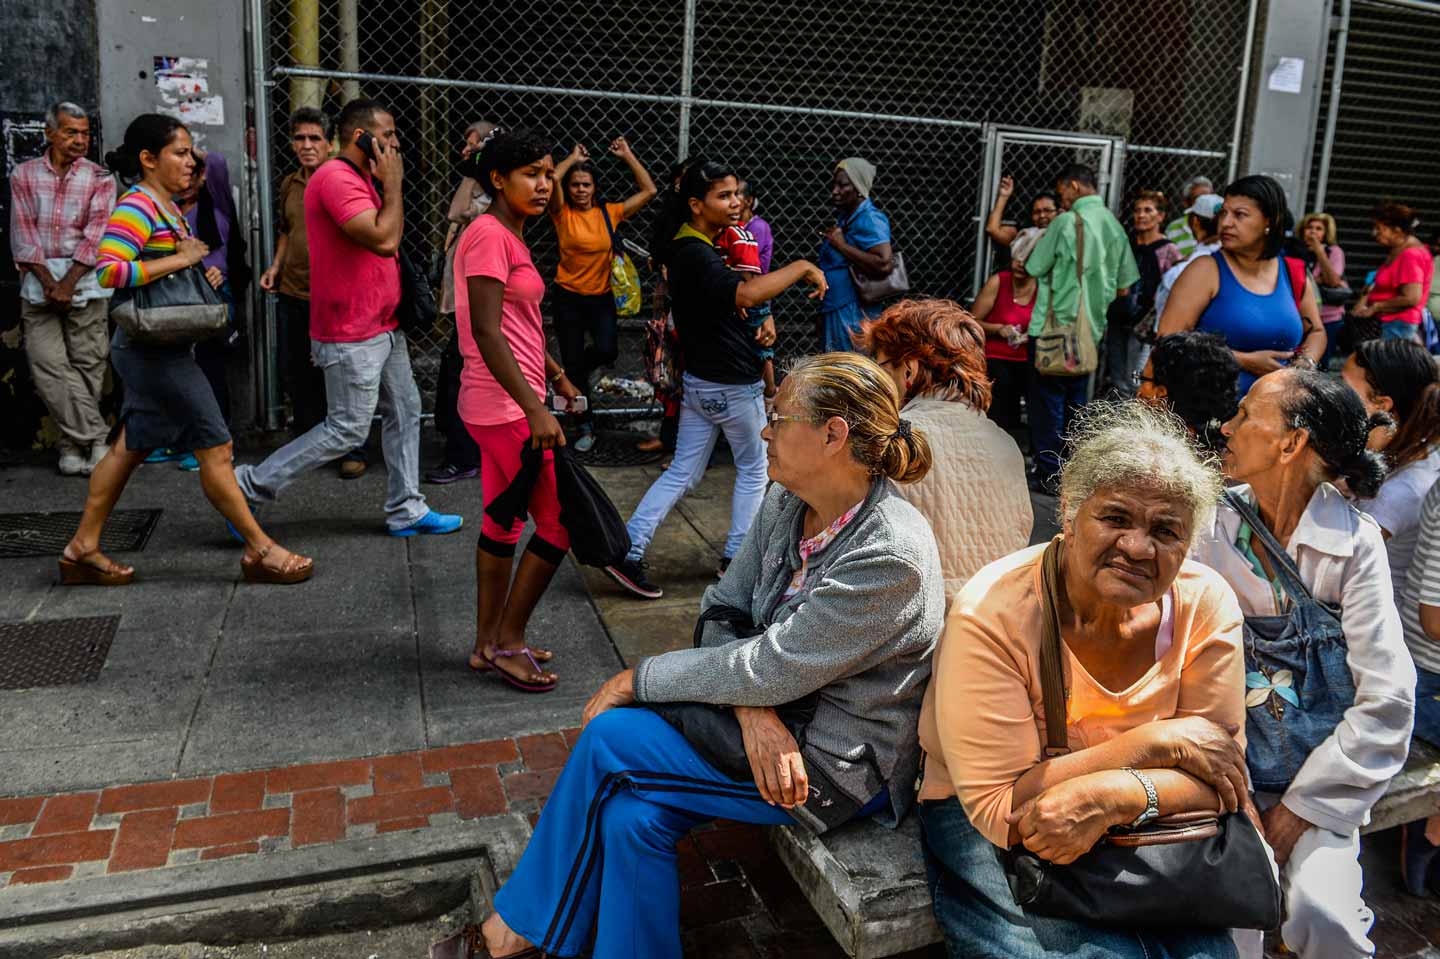 © Federico Parra. People queue to buy basic food and household items outside a supermarket in Caracas, on June 7, 2016. Maduro launched a program to combat the black-market resale of subsidized food and crippling shortages. He says the food shortages are being artificially created by a business elite bent on destroying Venezuela's socialist economic model and forcing him from power.